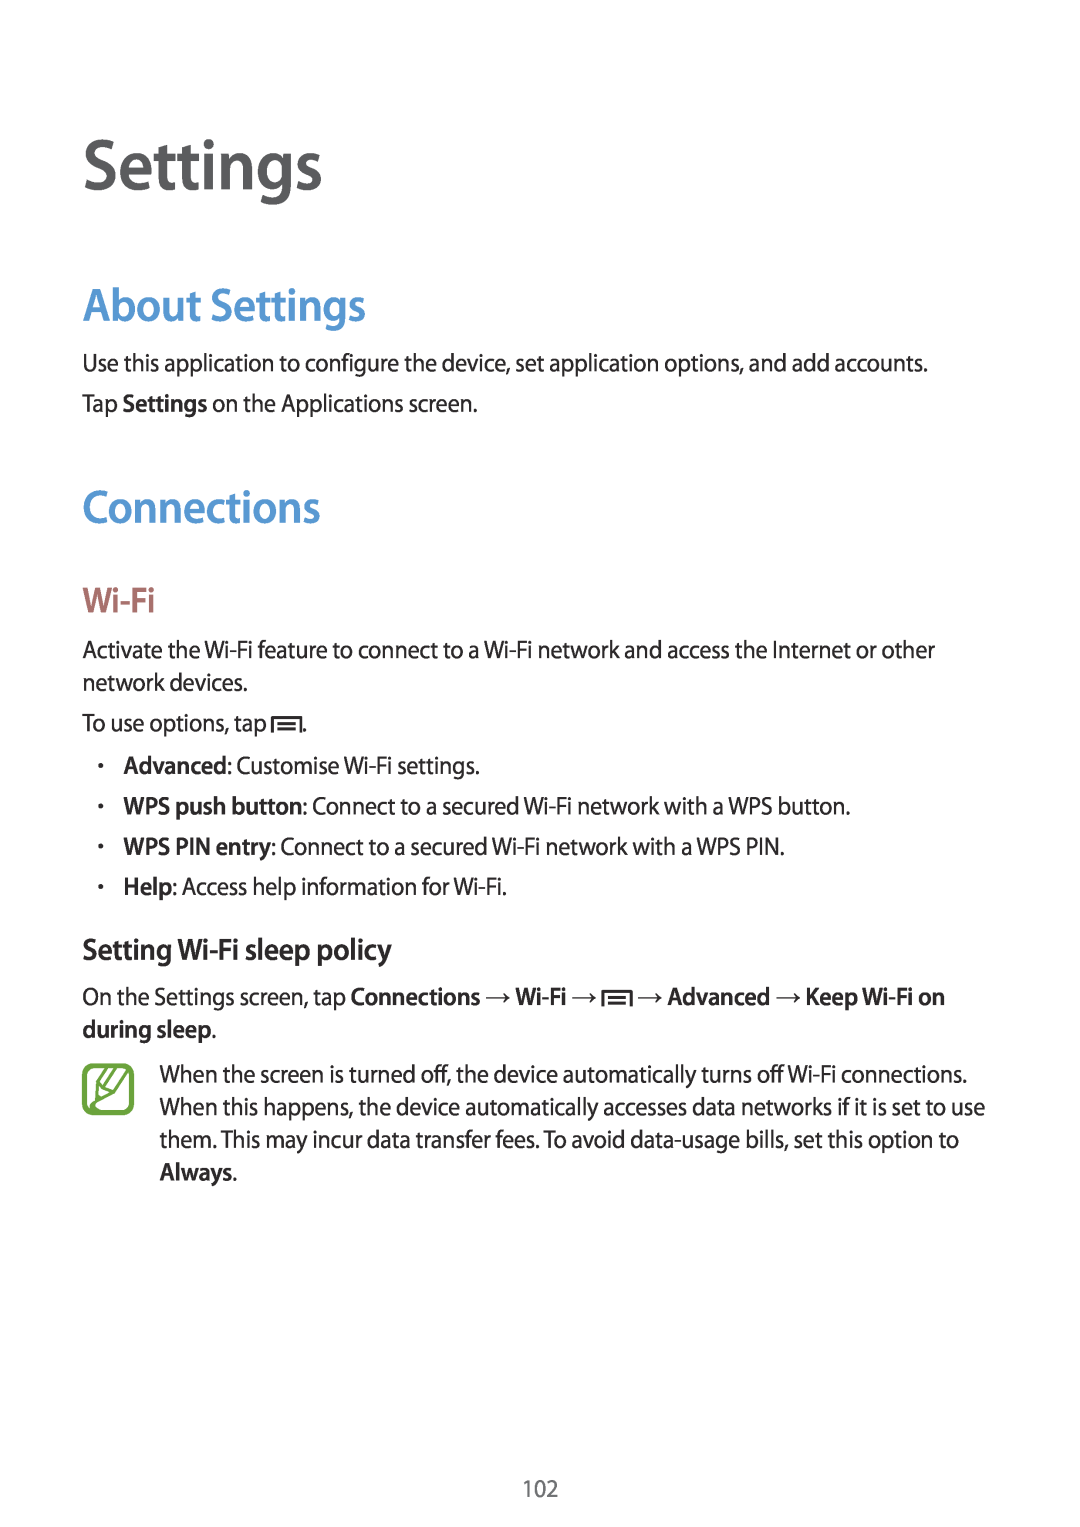 Samsung SM-G7102ZKATHR, SM-G7102ZDAMID, SM-G7102ZDAXSG manual About Settings, Connections, Setting Wi-Fi sleep policy 